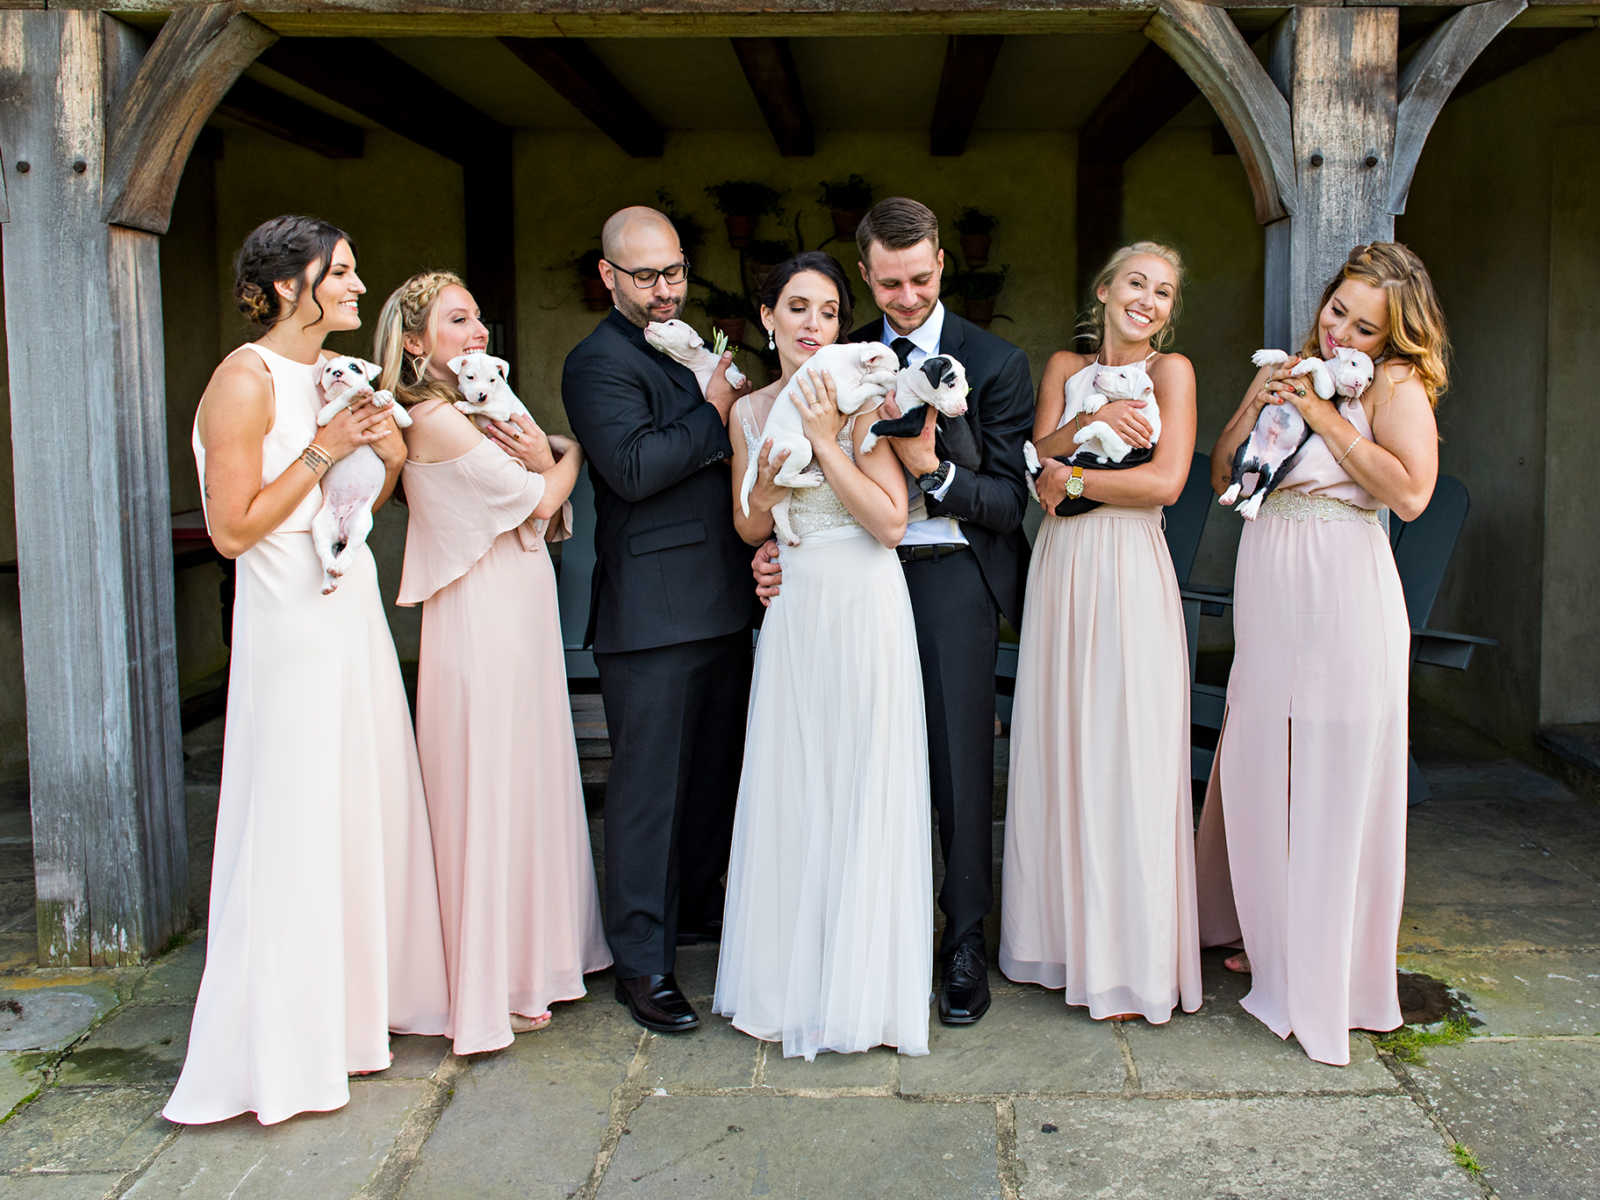 Bride and groom stand with members of their bridal party holding rescue puppies